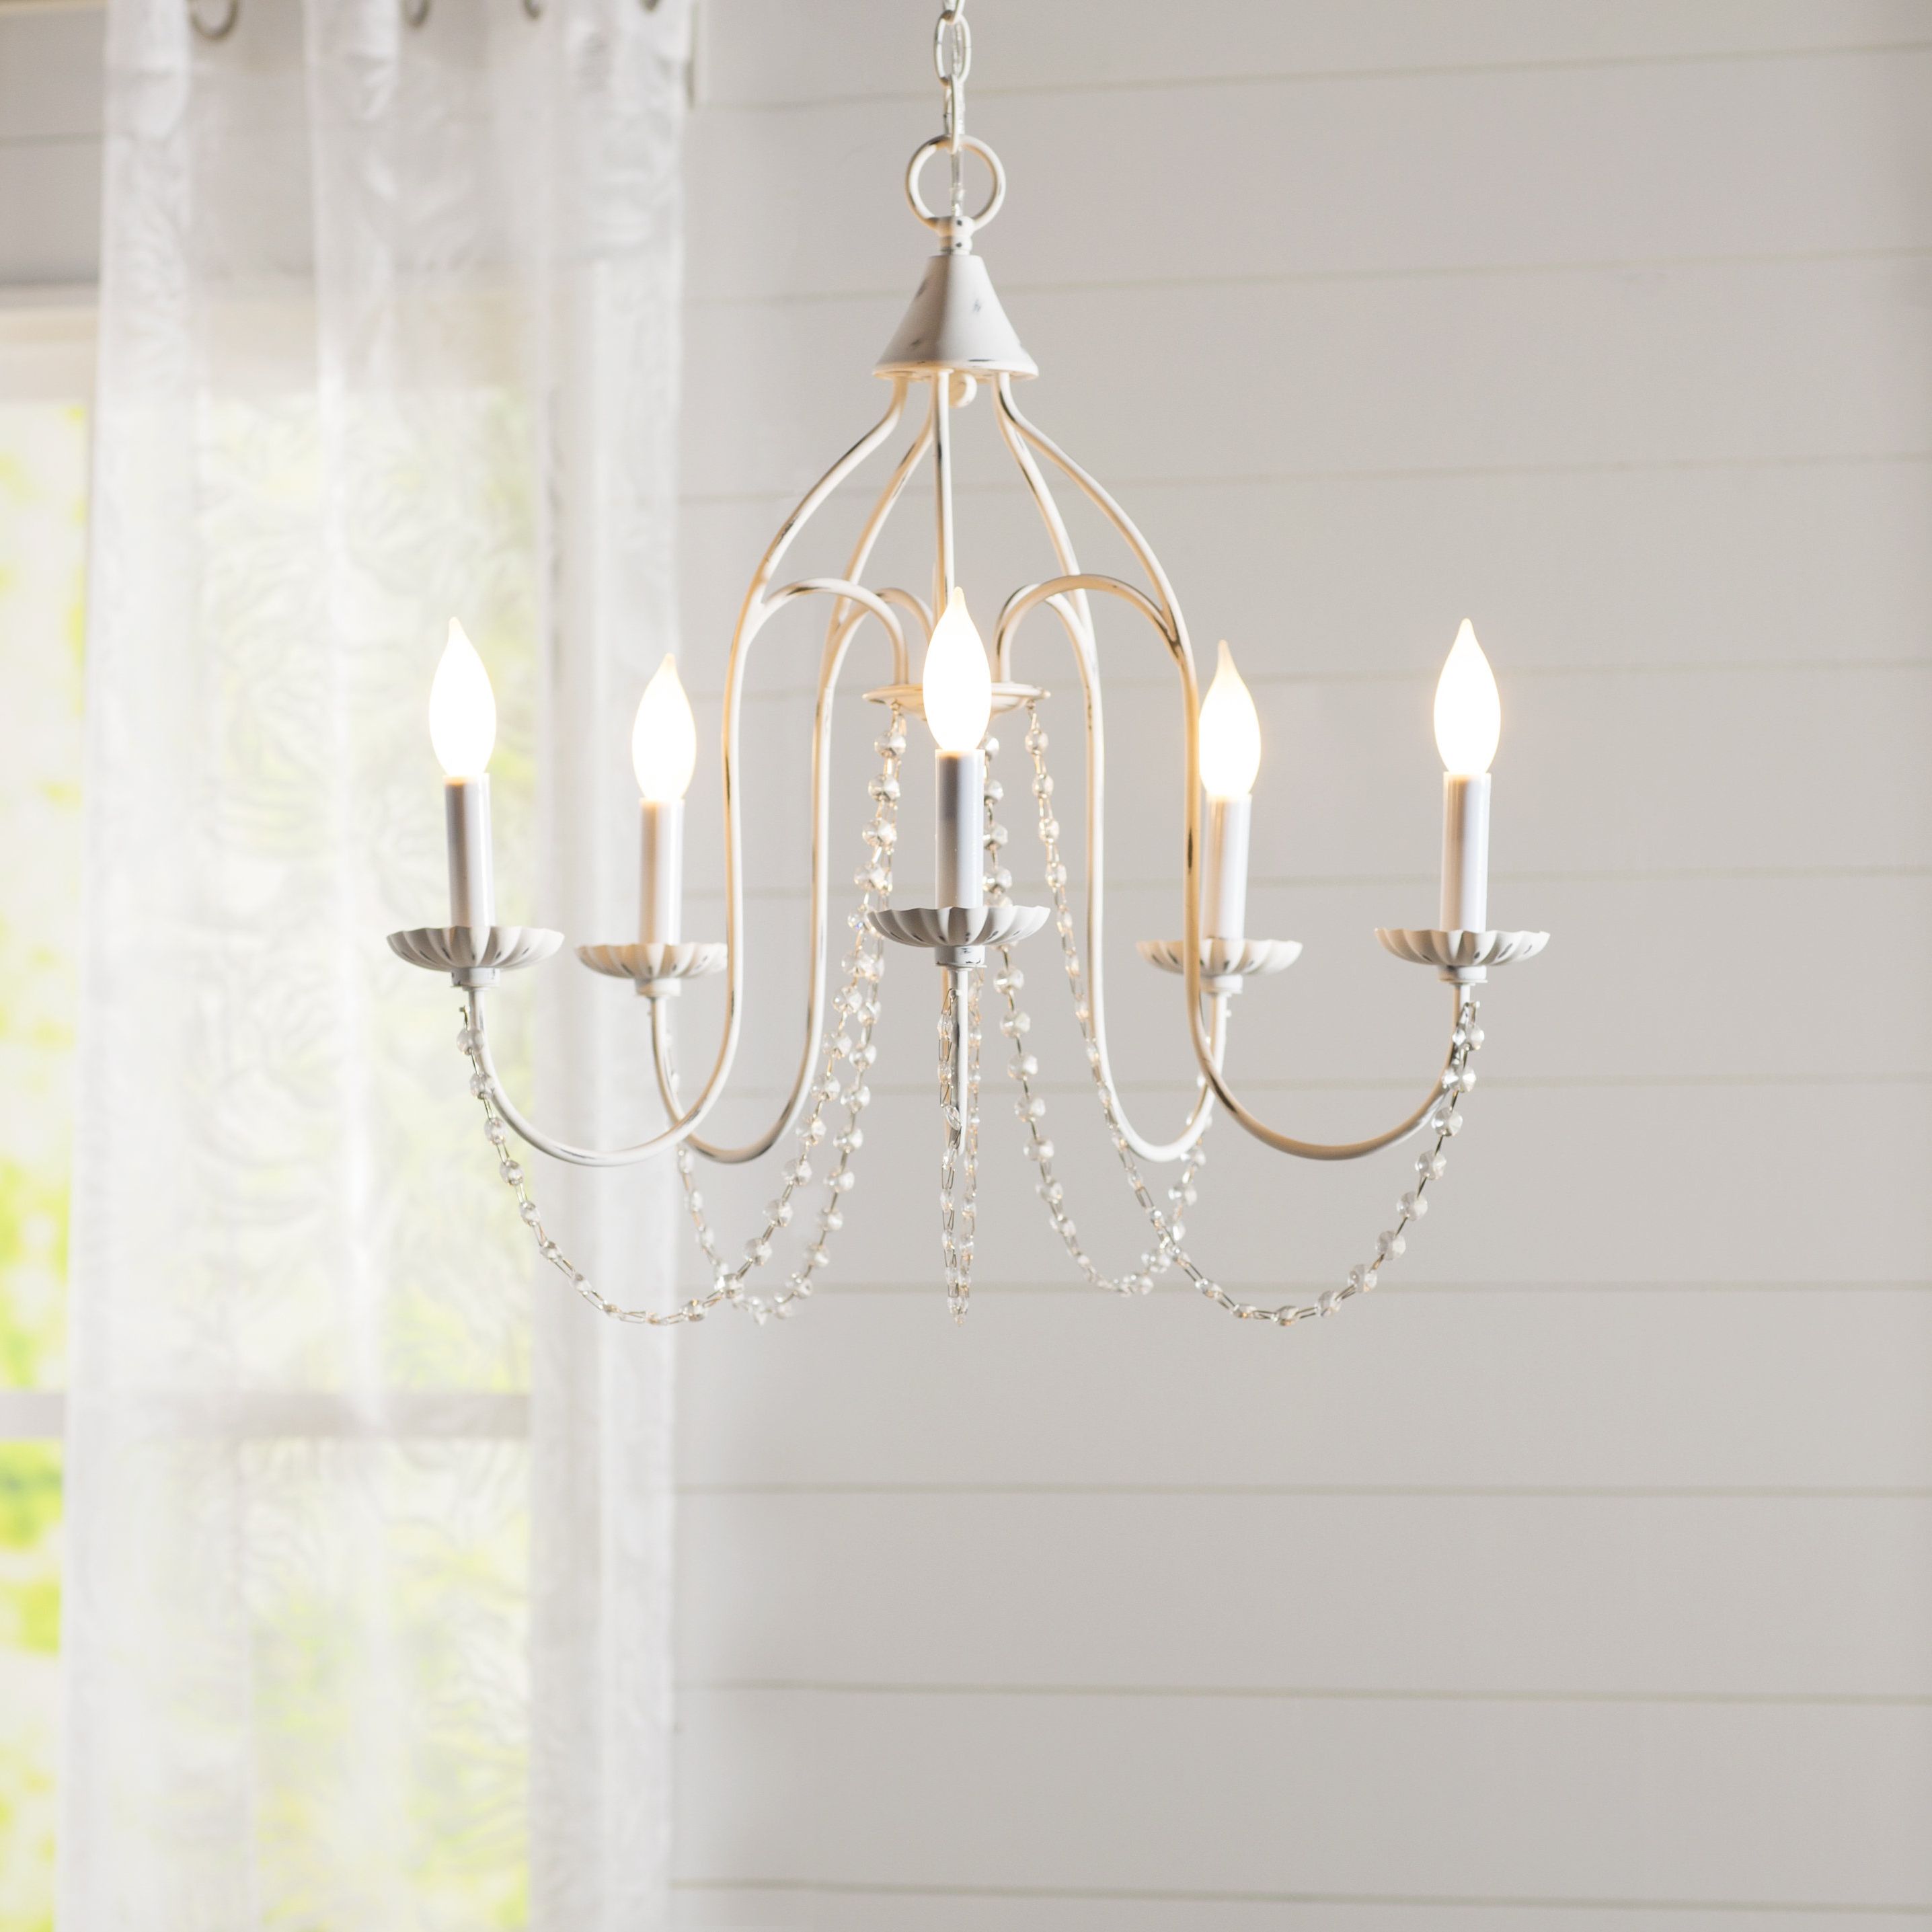 Best And Newest Florentina 5 Light Candle Style Chandelier Within Blanchette 5 Light Candle Style Chandeliers (View 6 of 25)